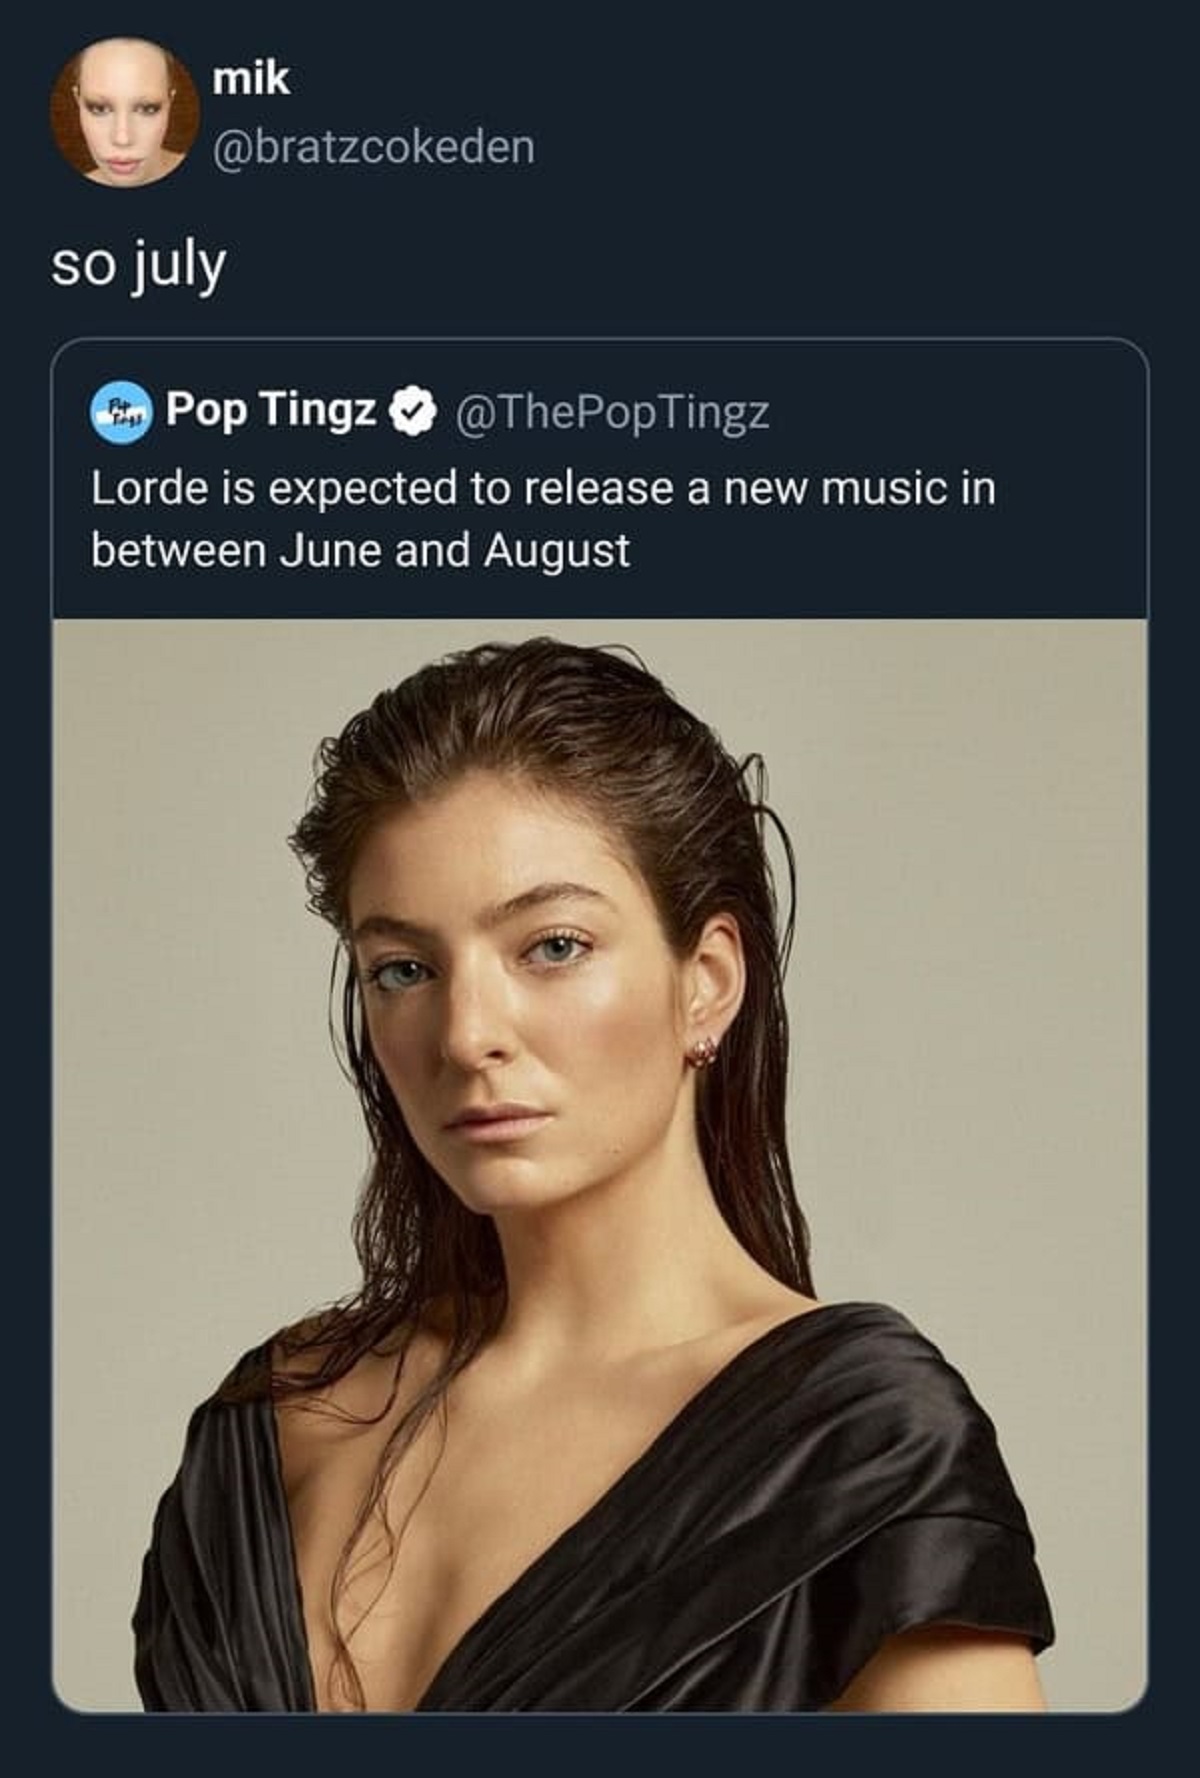 Lorde - so july mik Pop Tingz Lorde is expected to release a new music in between June and August